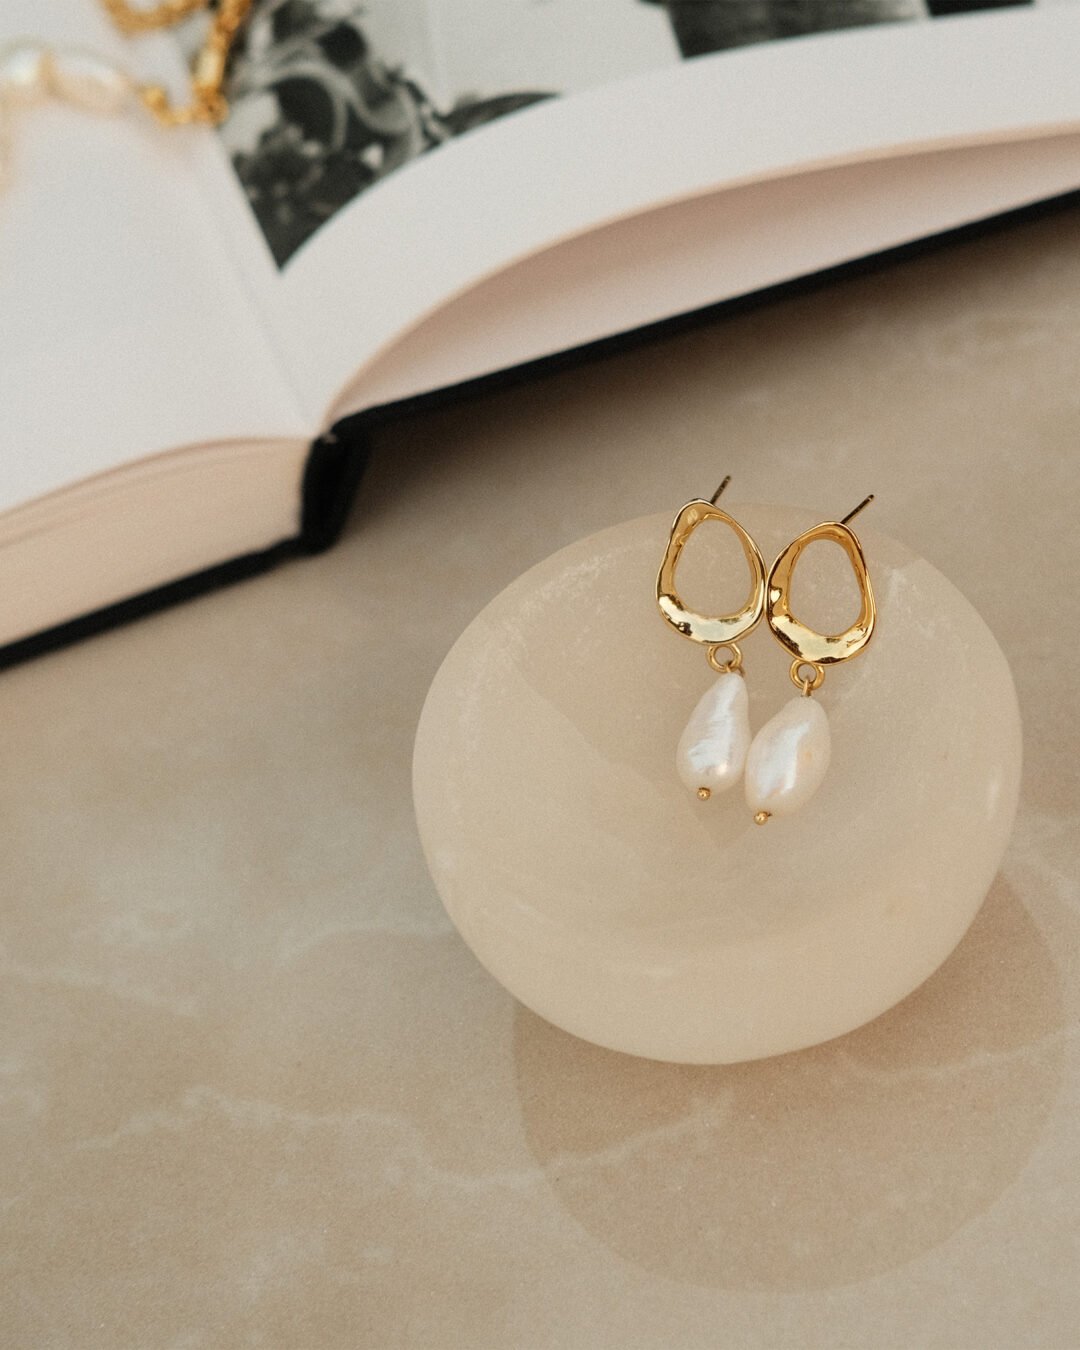 pearl drop earrings gold plated on a small glass tray to showcase it shine and beauty